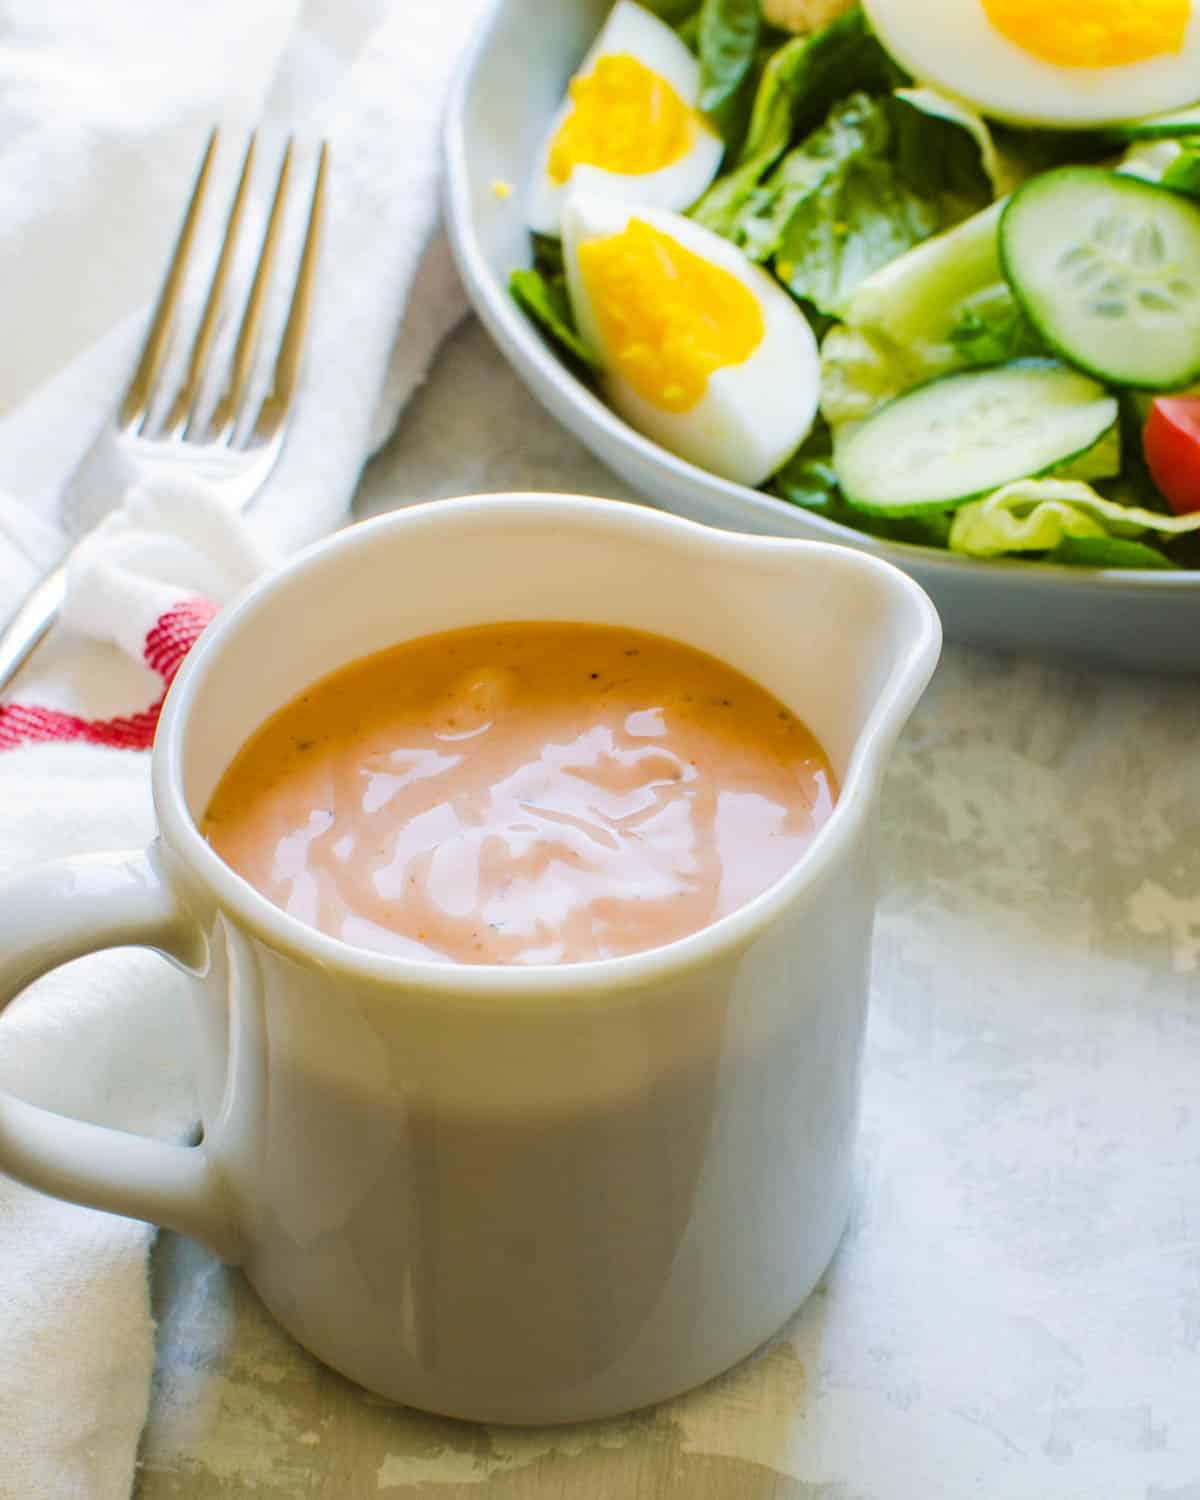 A pitcher of Russian dressing.